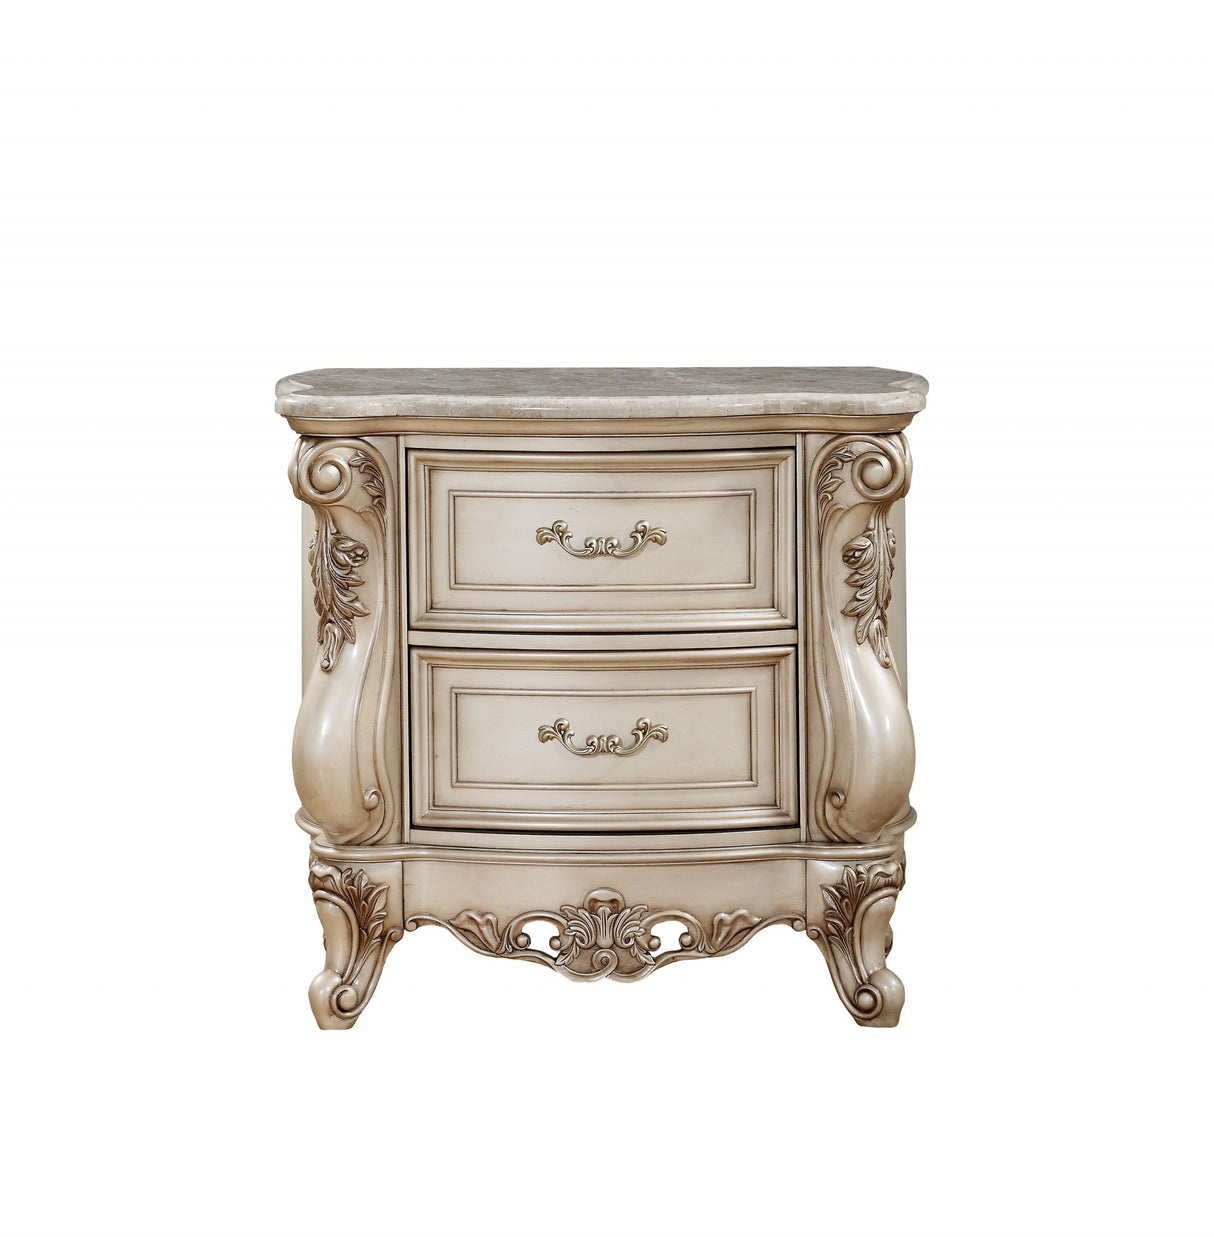 32" Antiqued White Two Drawers Mirrored Nightstand